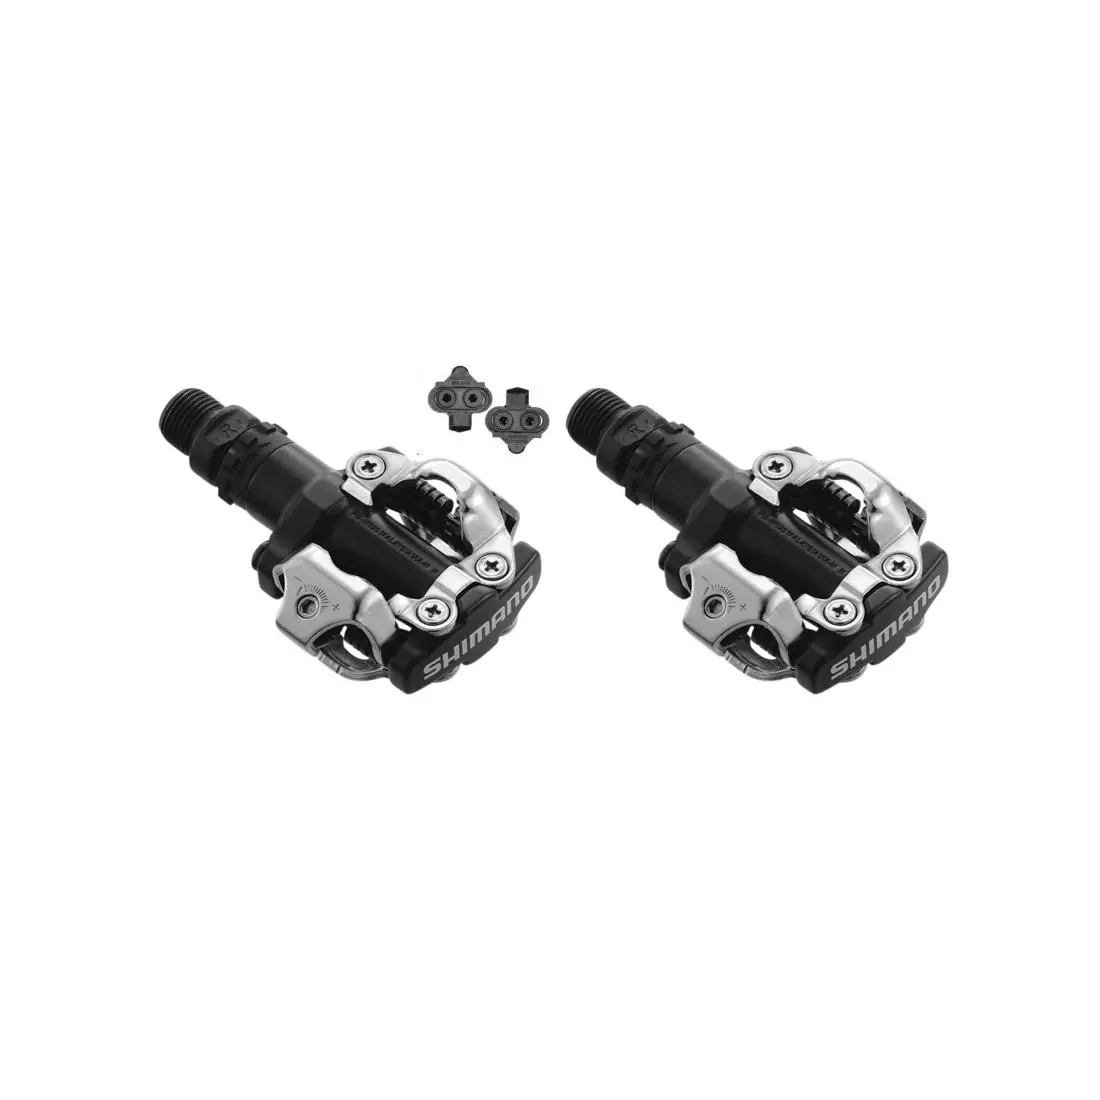 SHIMANO MTB / trekking bicycle pedals with cleats black PD-M520